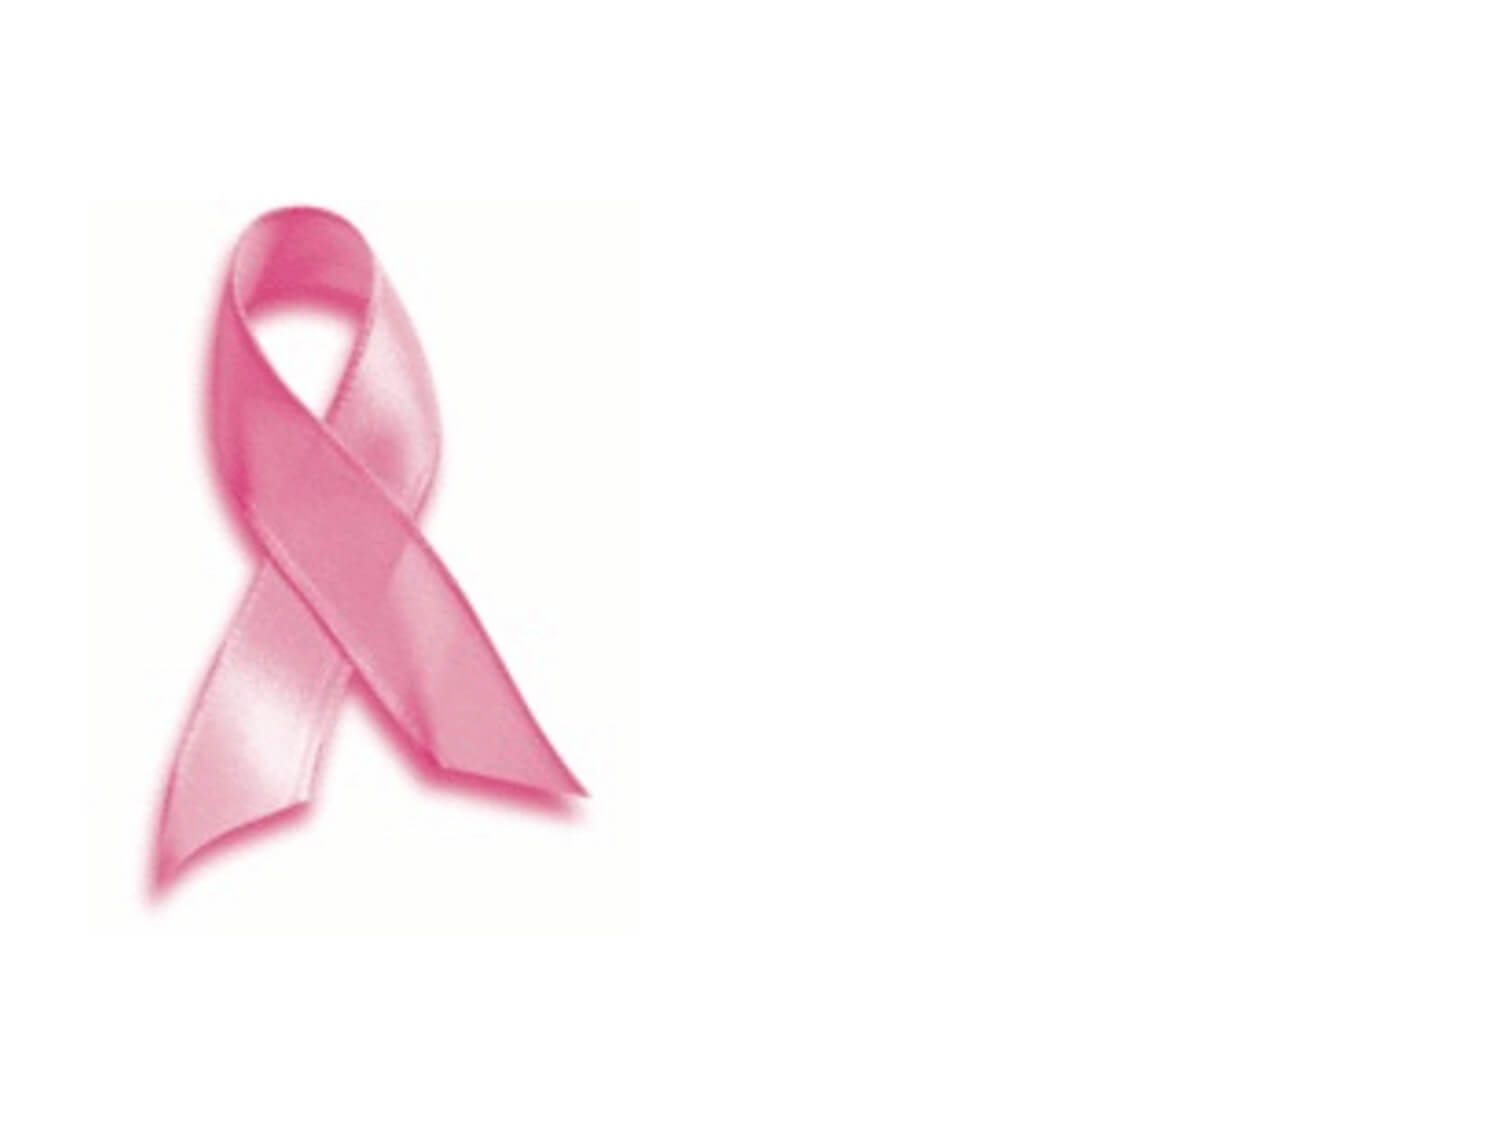 Breast Cancer Templates. Cancer Powerpoint Ppt Templates Ppt Inside Free Breast Cancer Powerpoint Templates